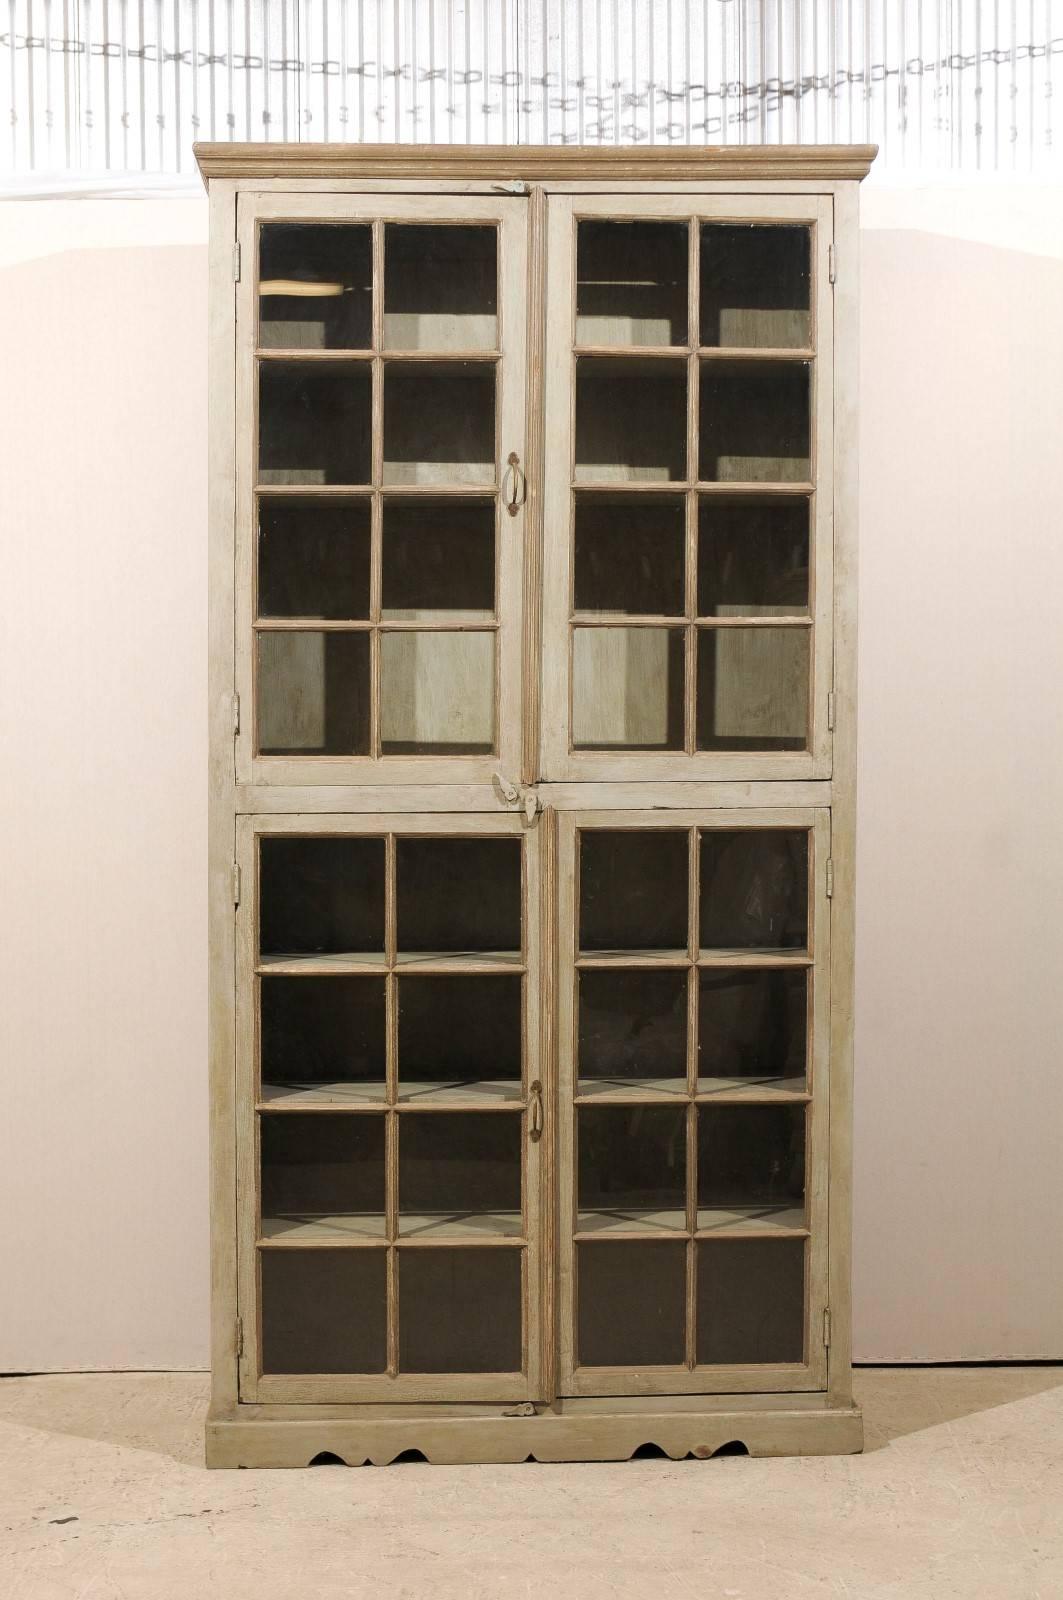 A tall, painted wood glass doors cabinet. This painted wood cabinet from India features a linear profile with four glass muntins doors. The doors open up to multiple inner shelves. The cabinet rests on a slightly scalloped base. The cabinet is of a